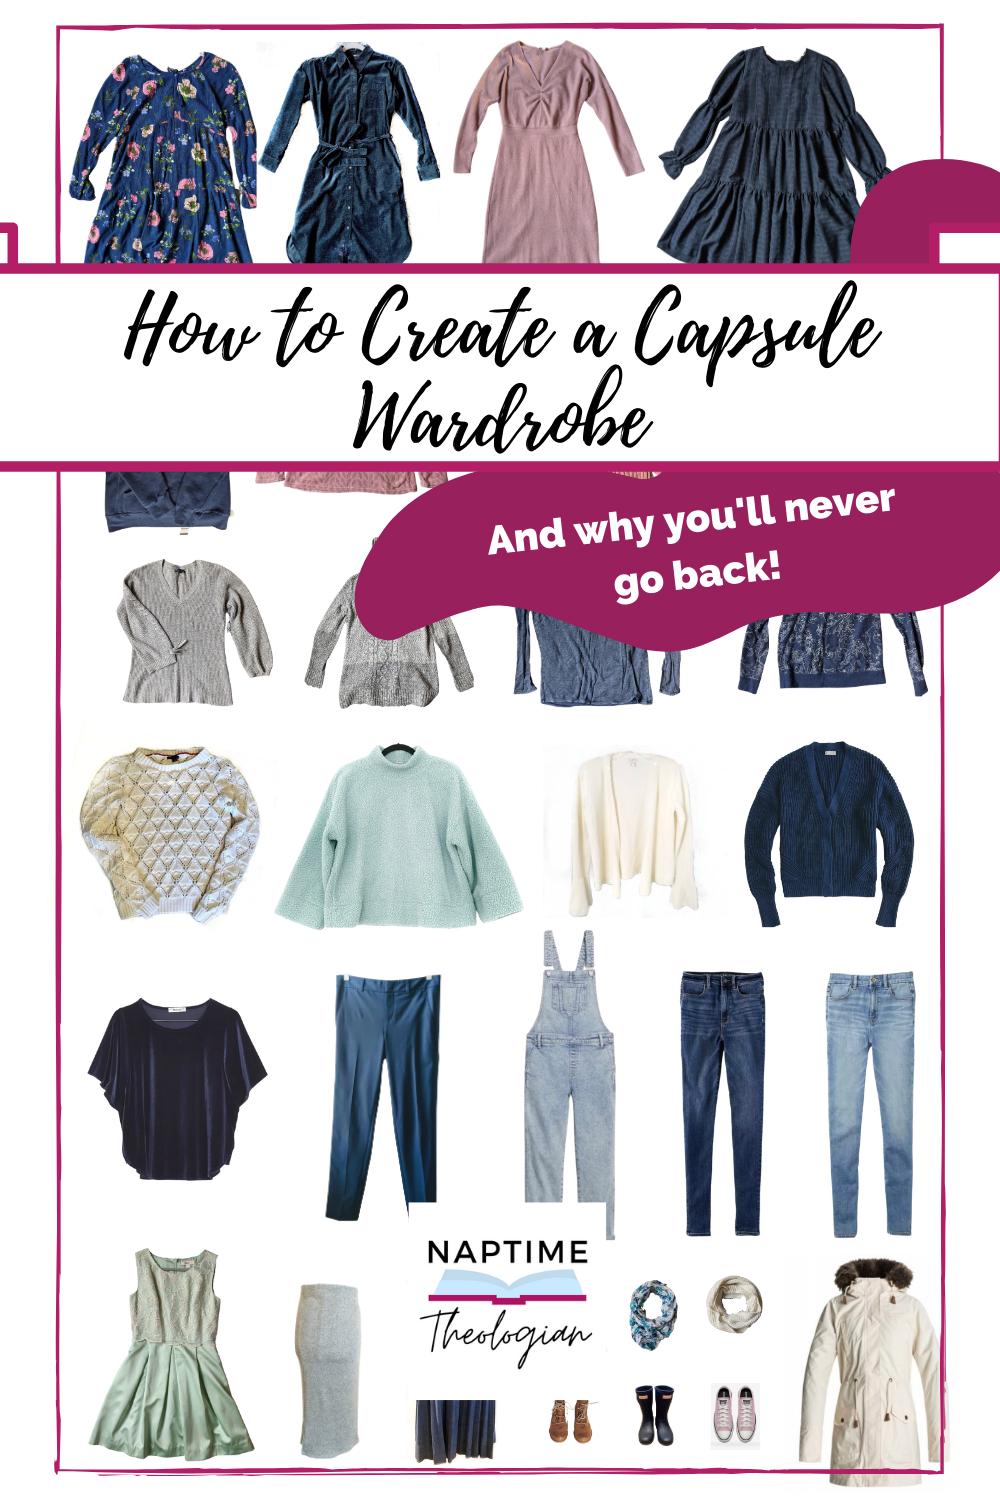 How to Create a Capsule Wardrobe that Works For You!